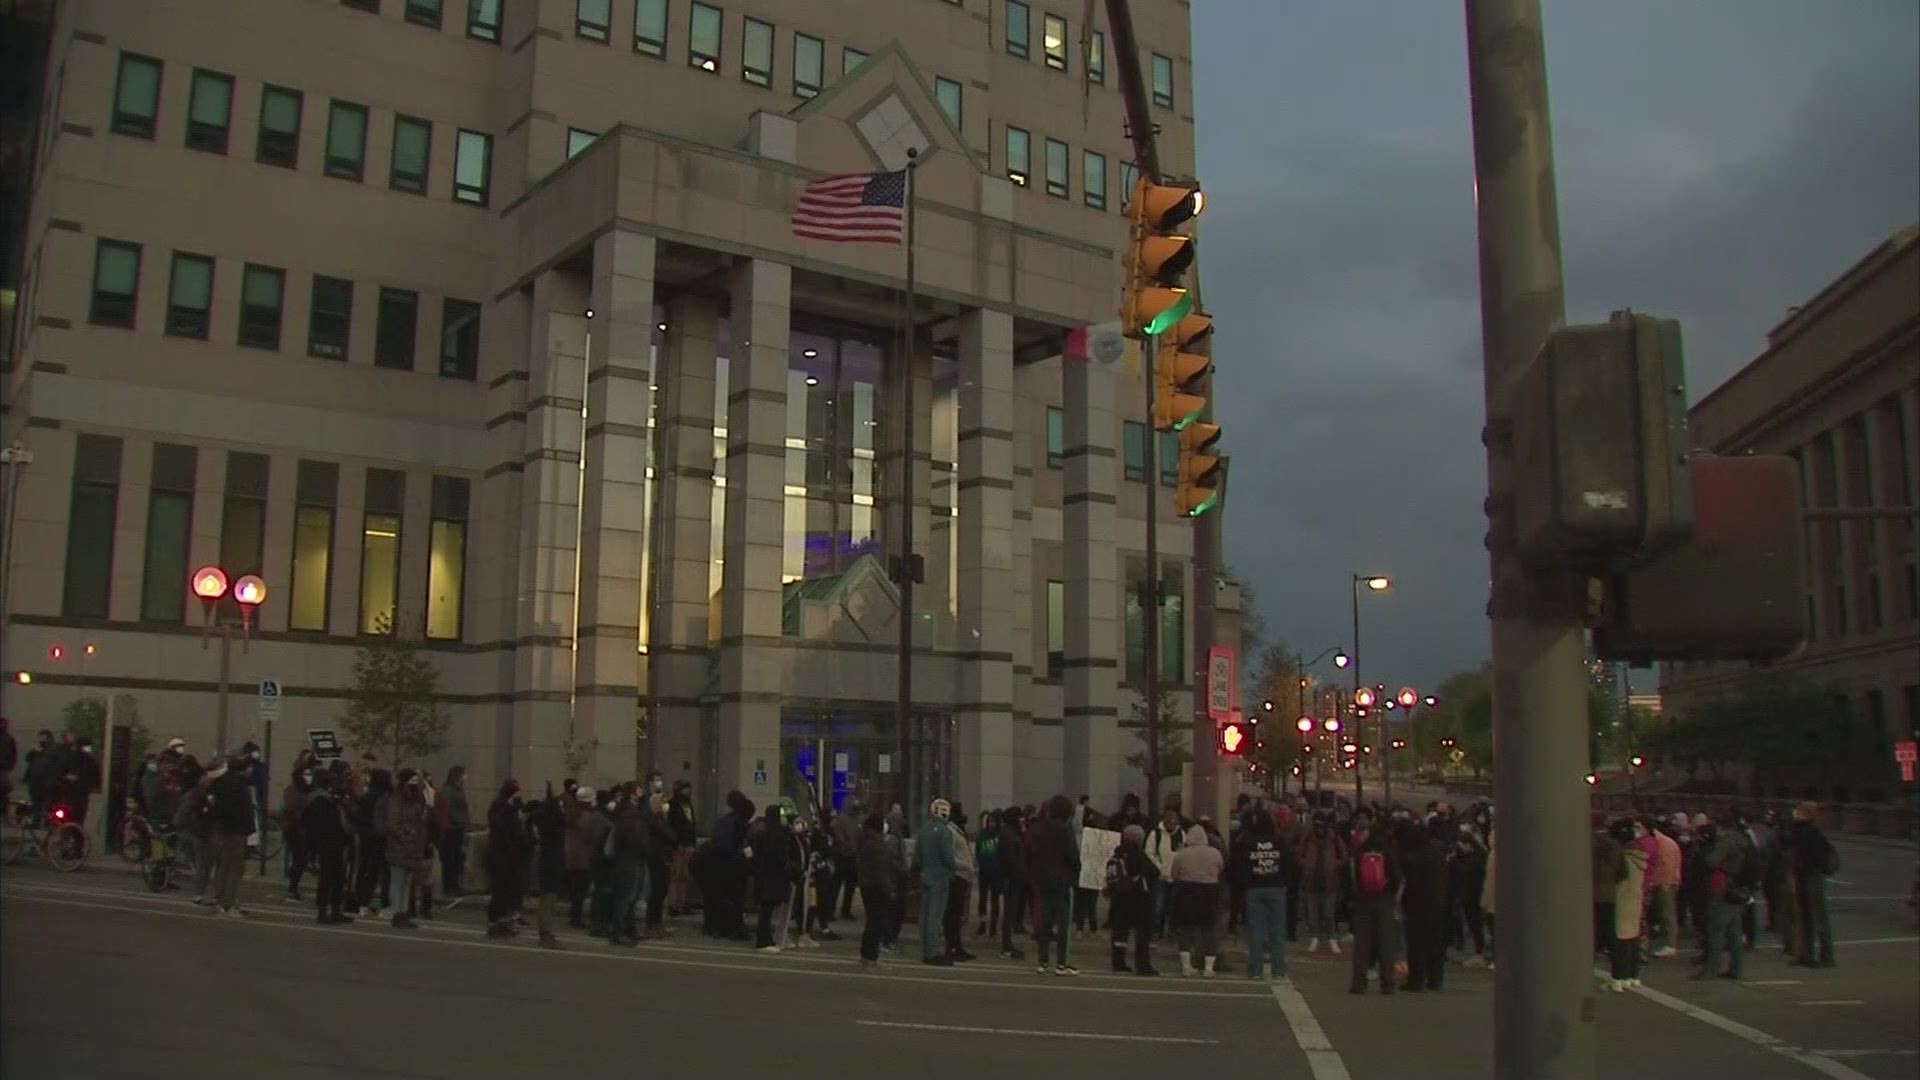 Around 9:30 p.m., a group of about 200 to 250 people marched down Marconi Boulevard past the Ohio Supreme Court.